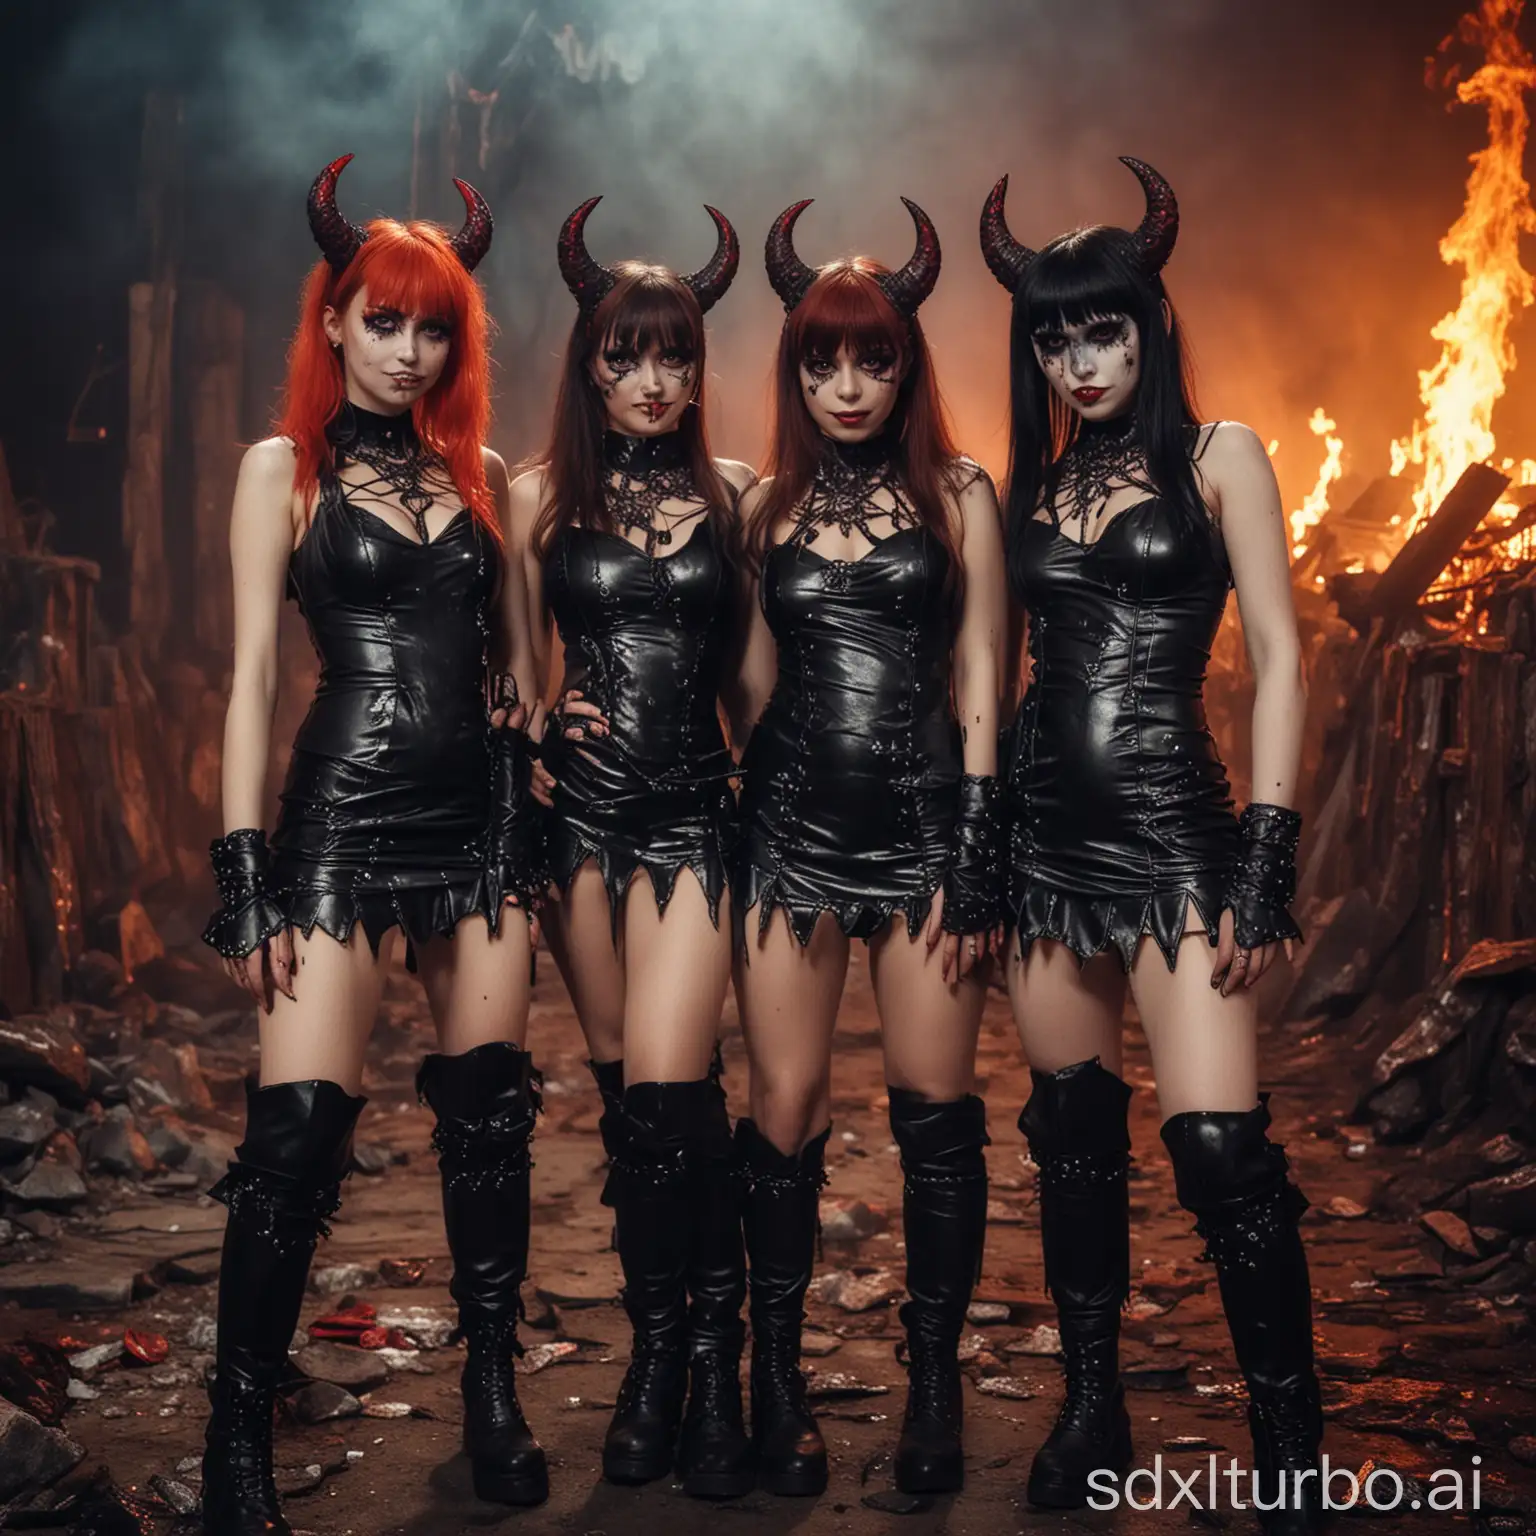 Three young demon++ ladies++ in rave outfits pose for a photo in hell